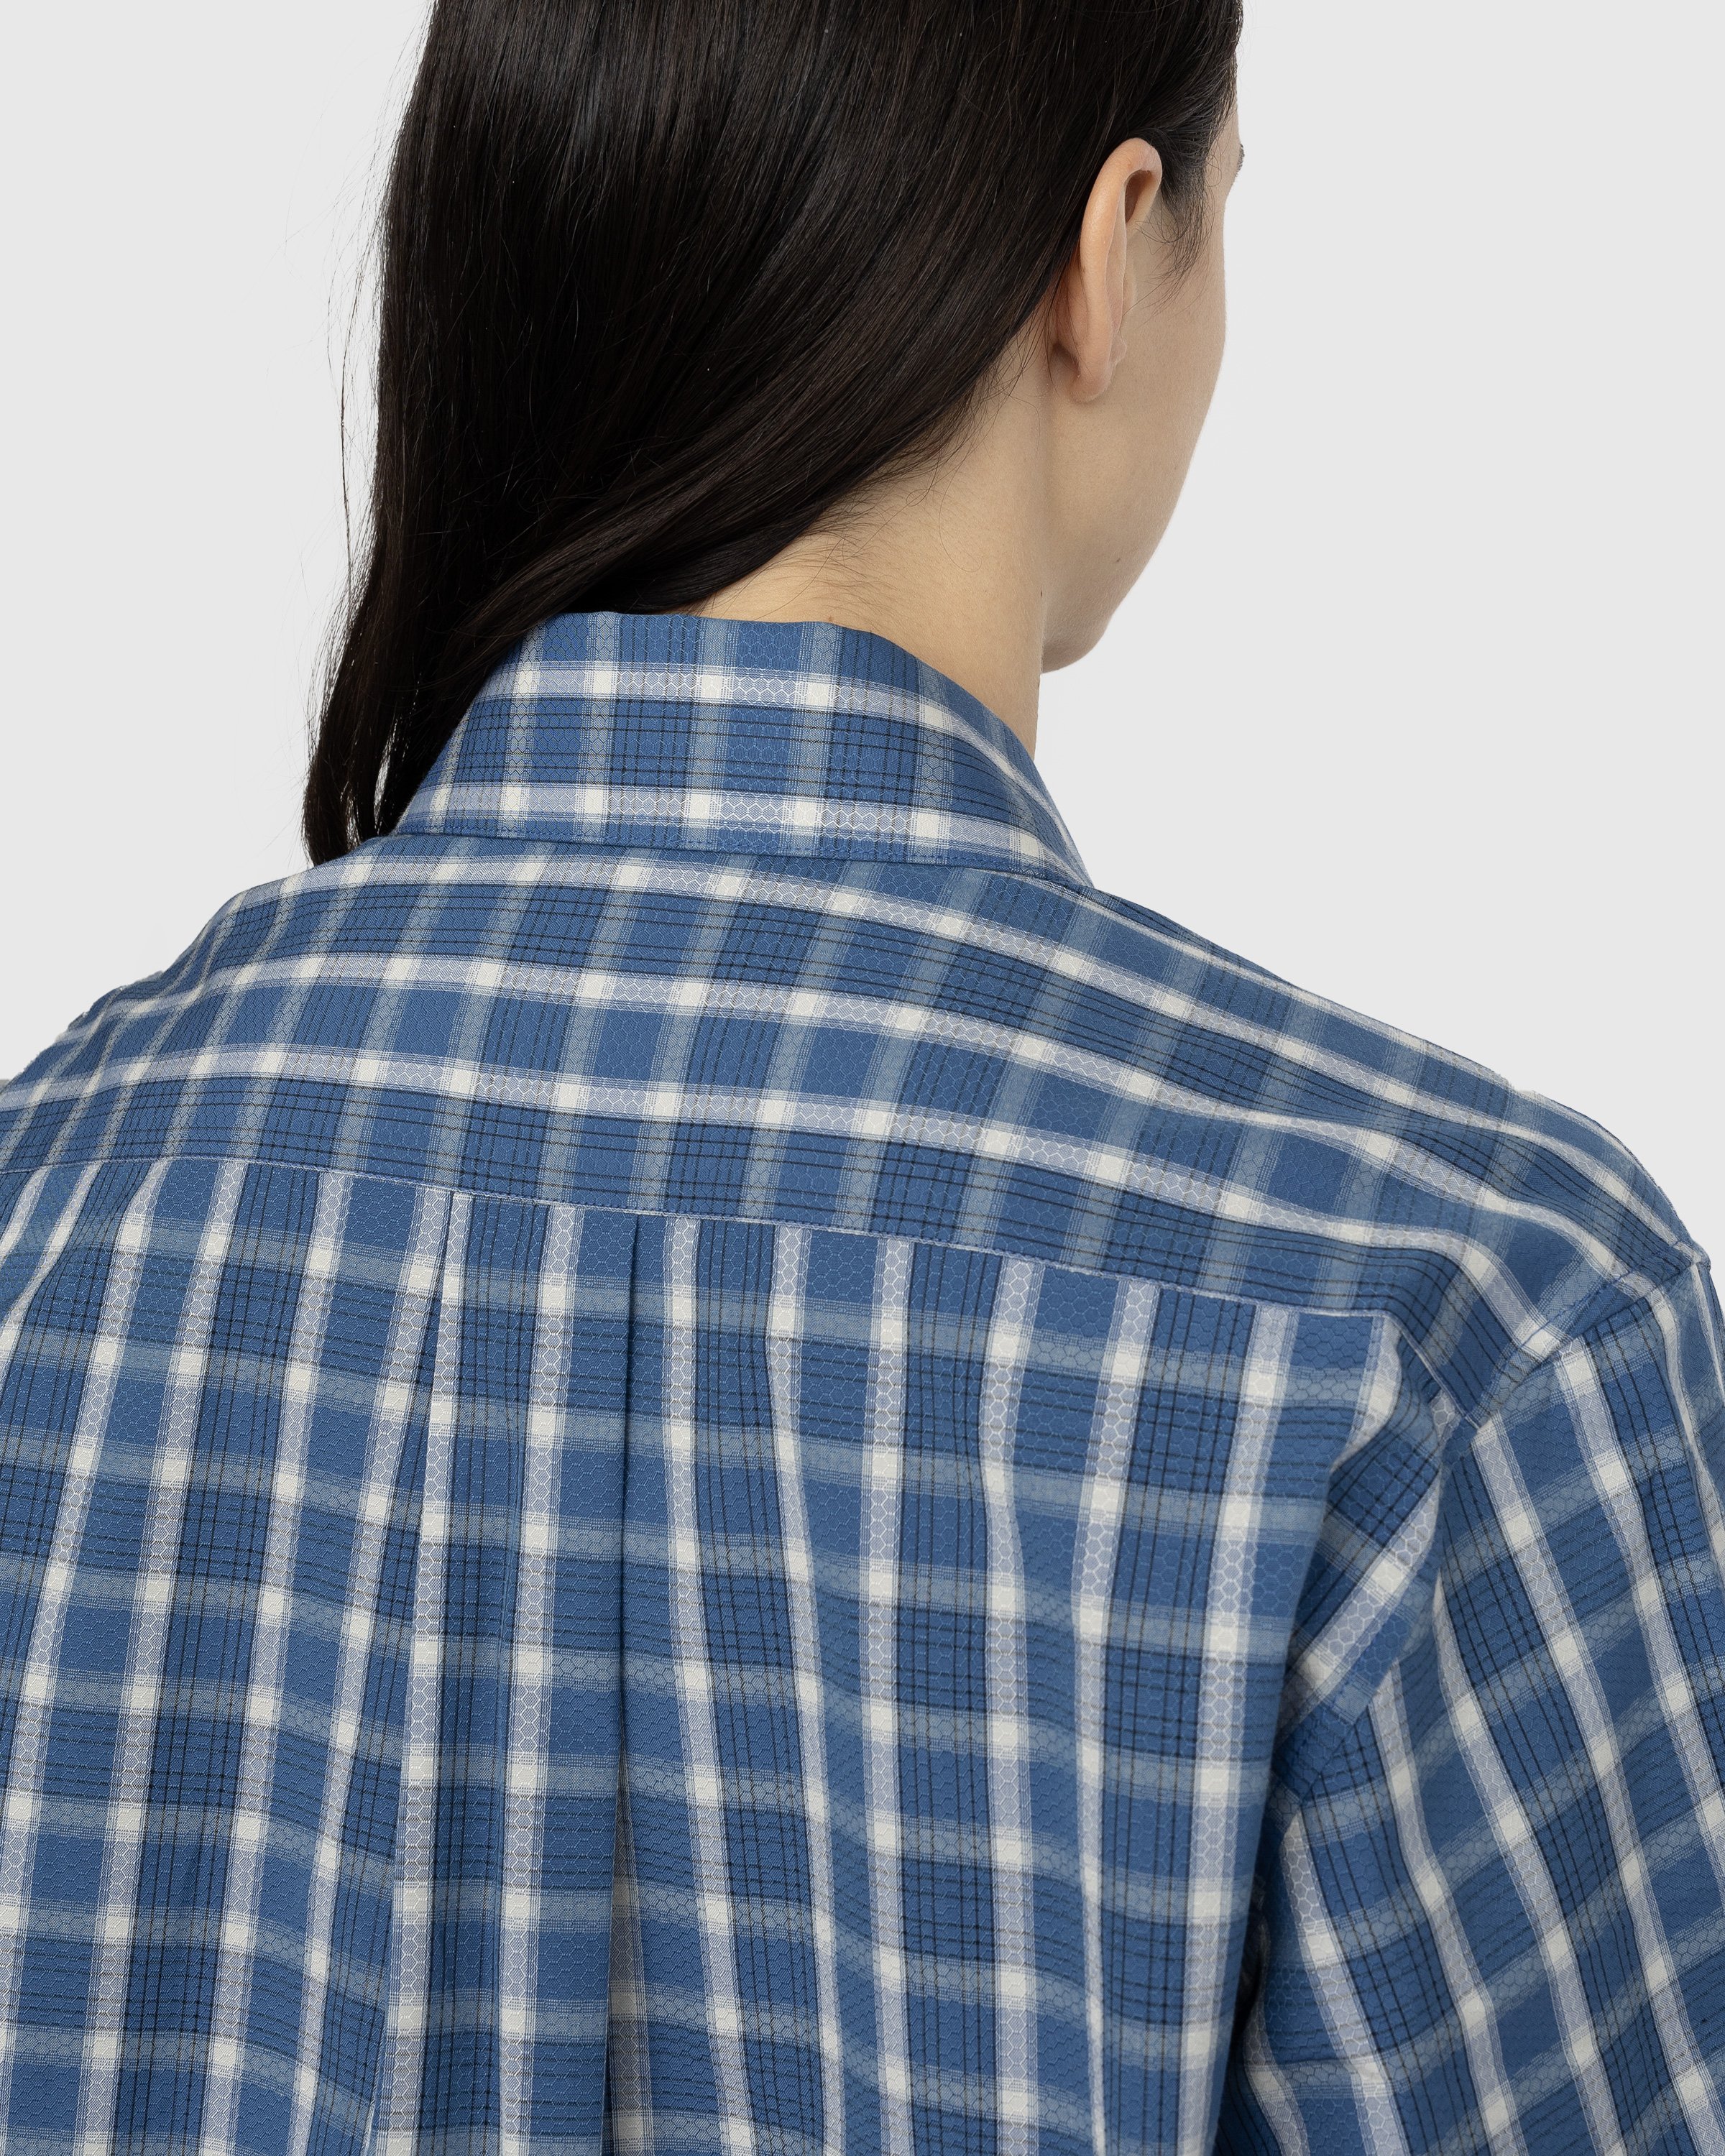 Martine Rose - Classic Check Button-Down Shirt Blue - Clothing - Blue - Image 5